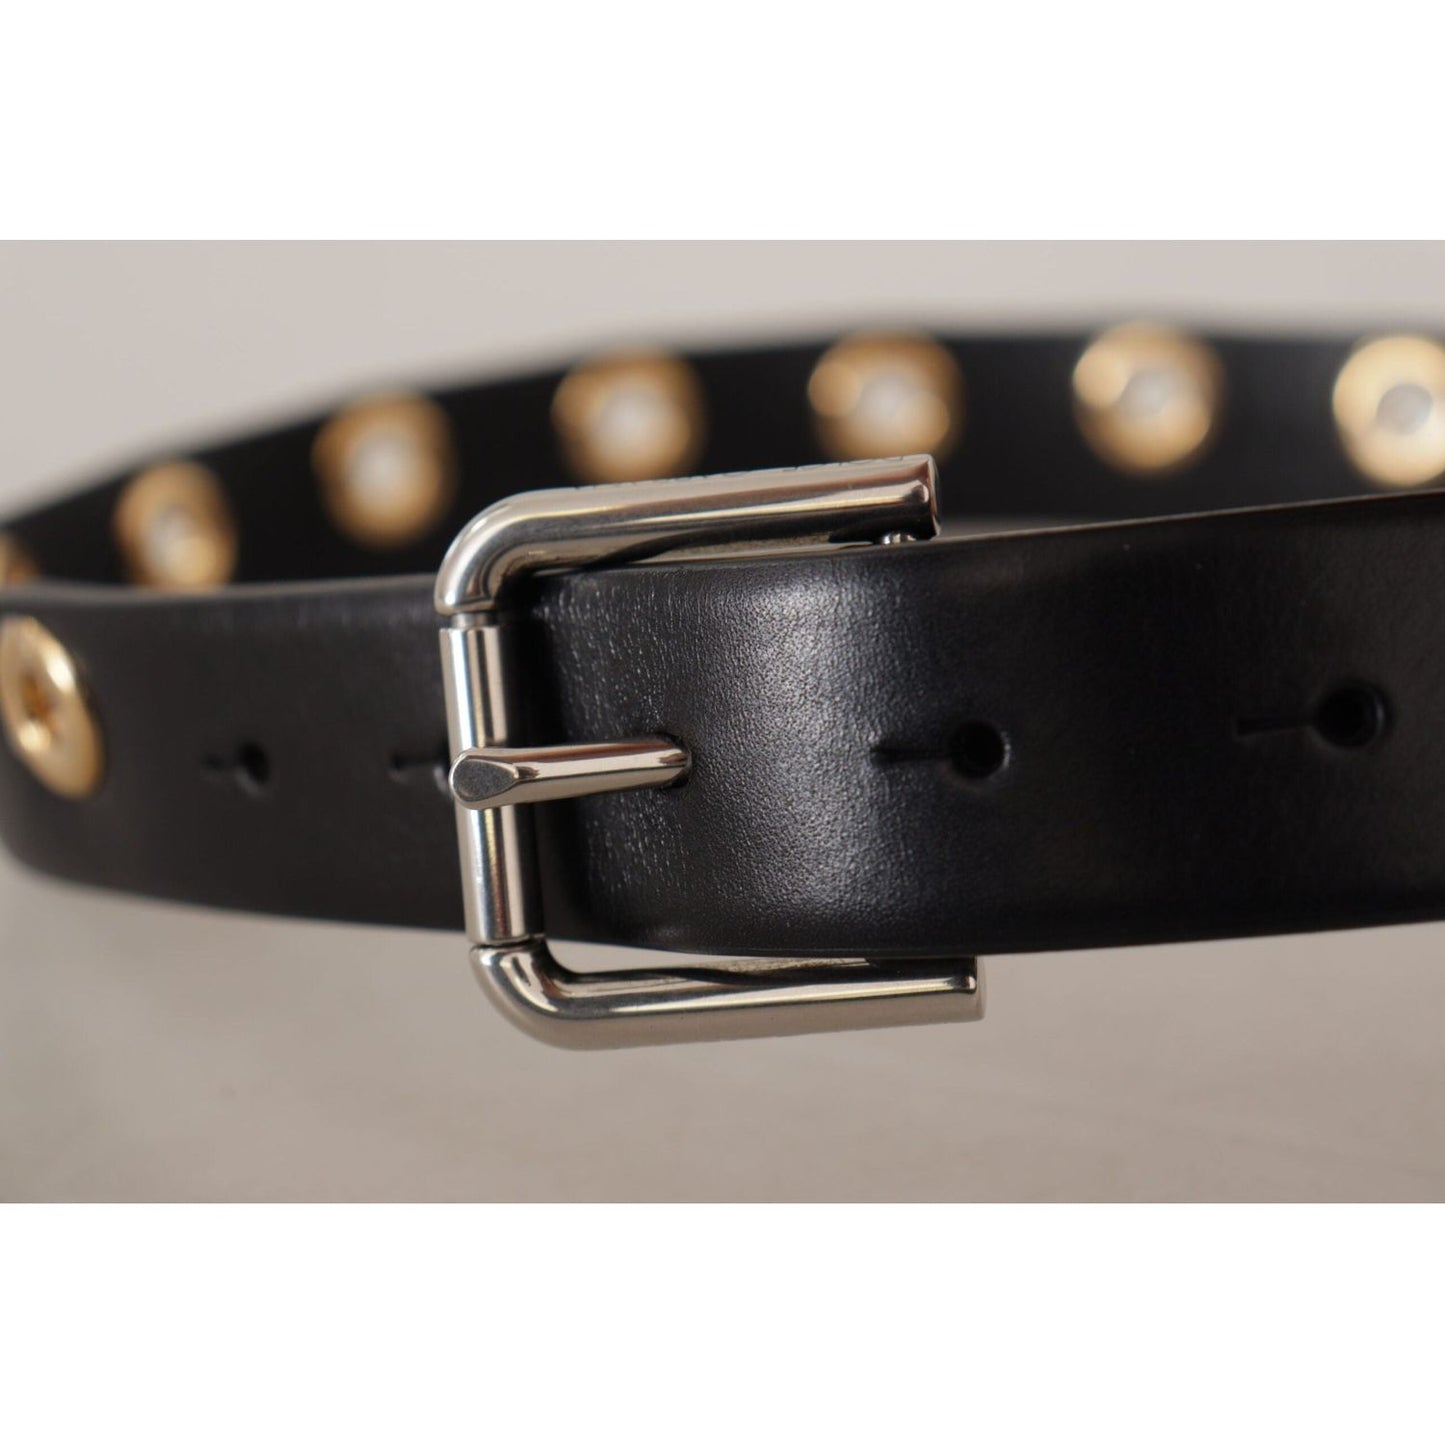 Dolce & Gabbana Chic Black Leather Belt with Engraved Buckle black-leather-eyelet-silver-tone-metal-buckle-belt